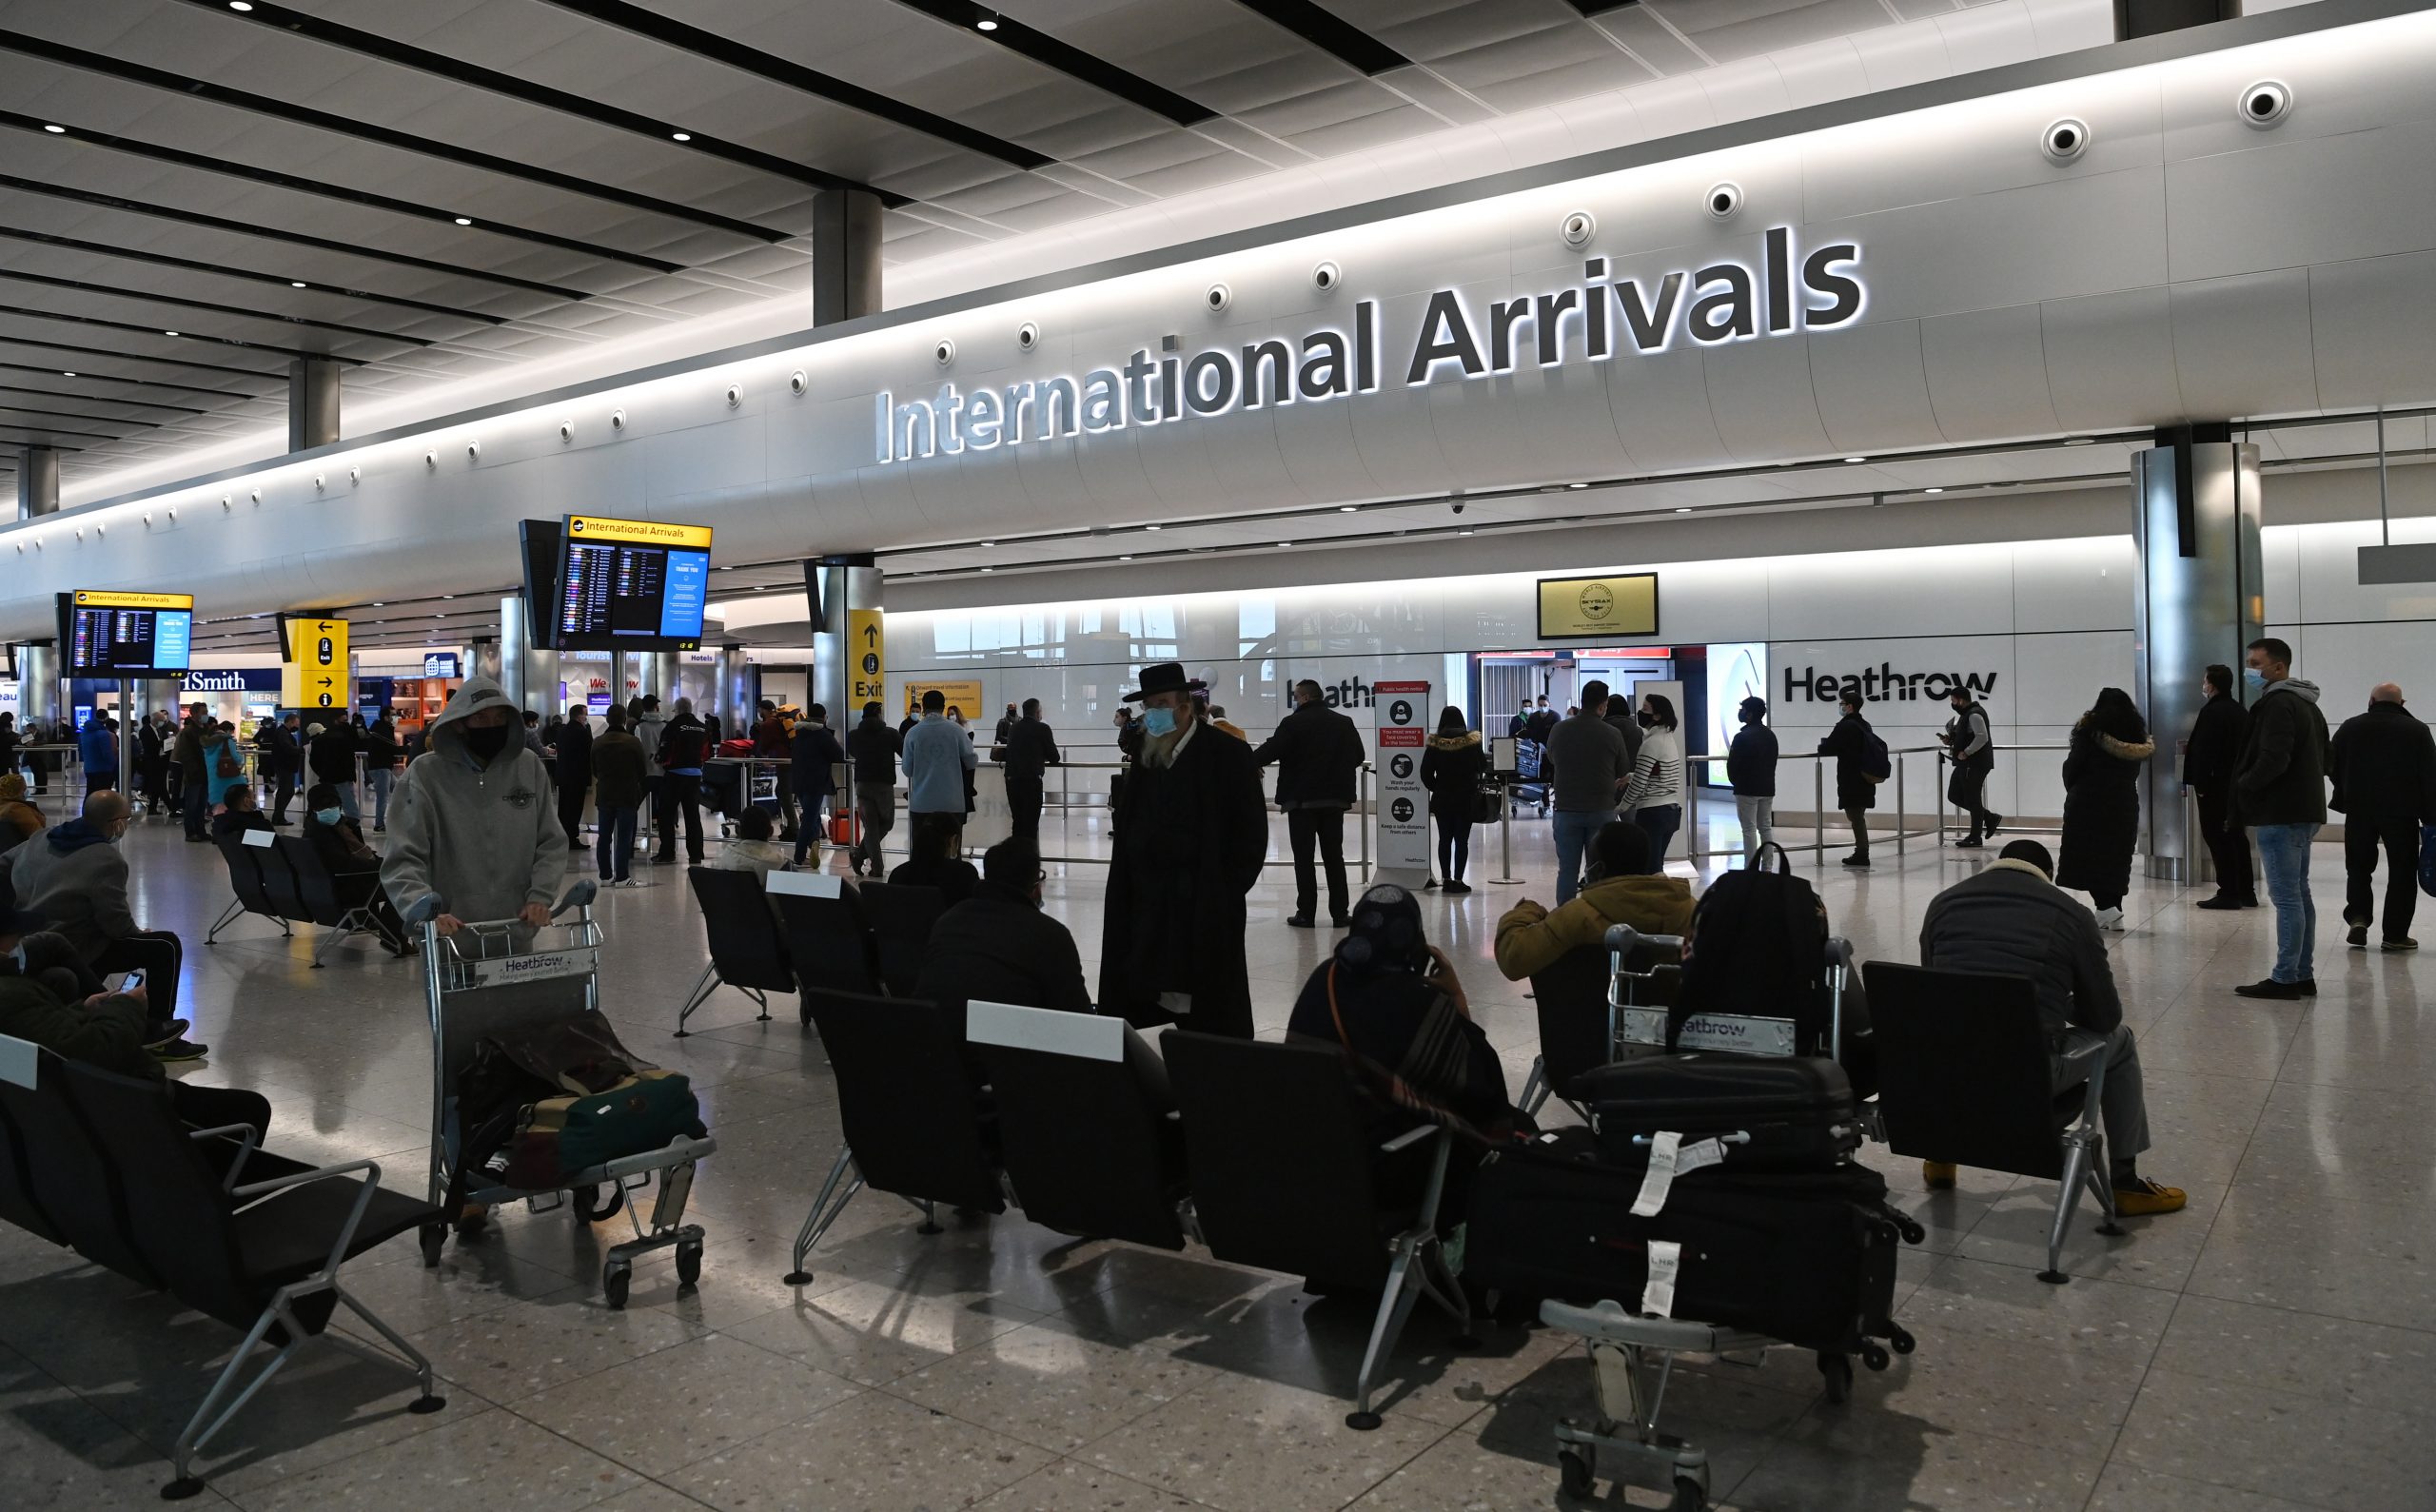 epa08943569 Travellers arrive at Heathrow Airport in London, Britain, 17 January 2021. The UK government is implementing a closure on all travel corridors from Monday 18 January 2021. Travellers will also need to provide a negative coronavirus test to enter the country. Britain's national health service (NHS) is coming under sever pressure as Covid-19 hospital admissions continue to rise across the UK. Some one thousand people are dying each day from the Covid-19 disease.  EPA/FACUNDO ARRIZABALAGA